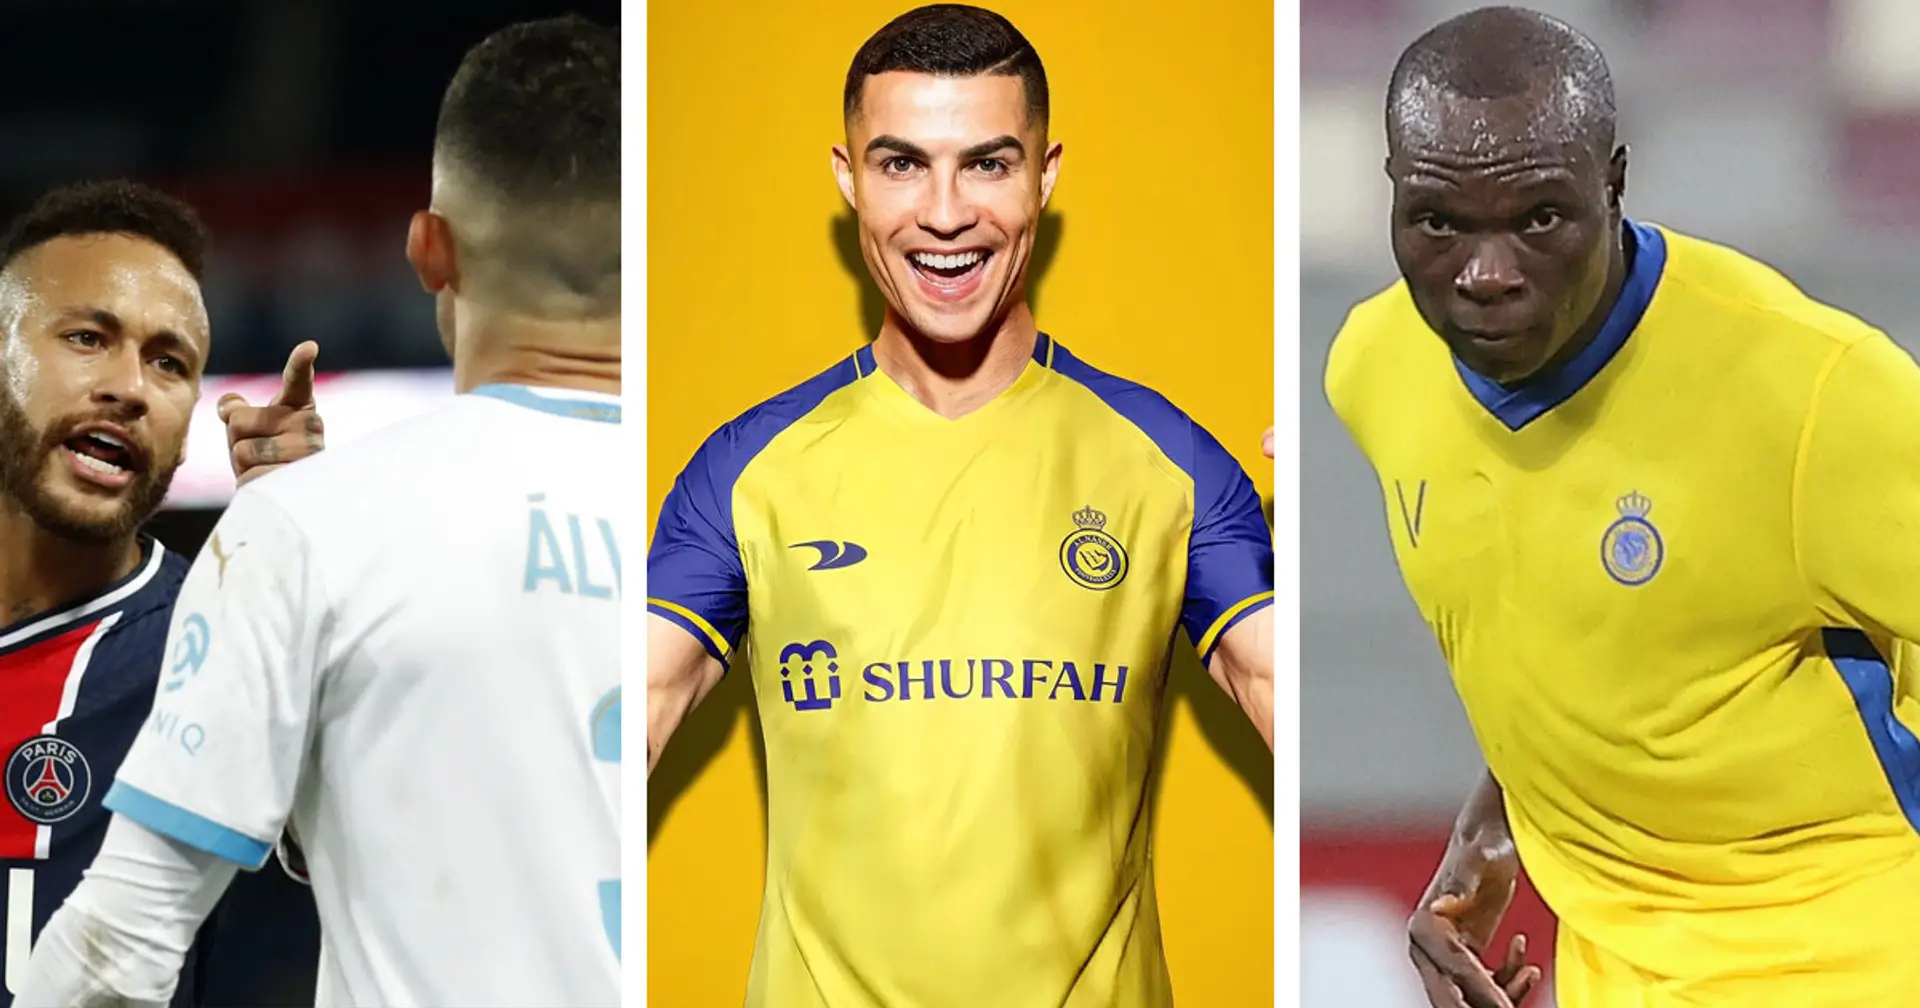 Guy who Neymar accused of racism & 3 more new Cristiano Ronaldo teammates you probably already know